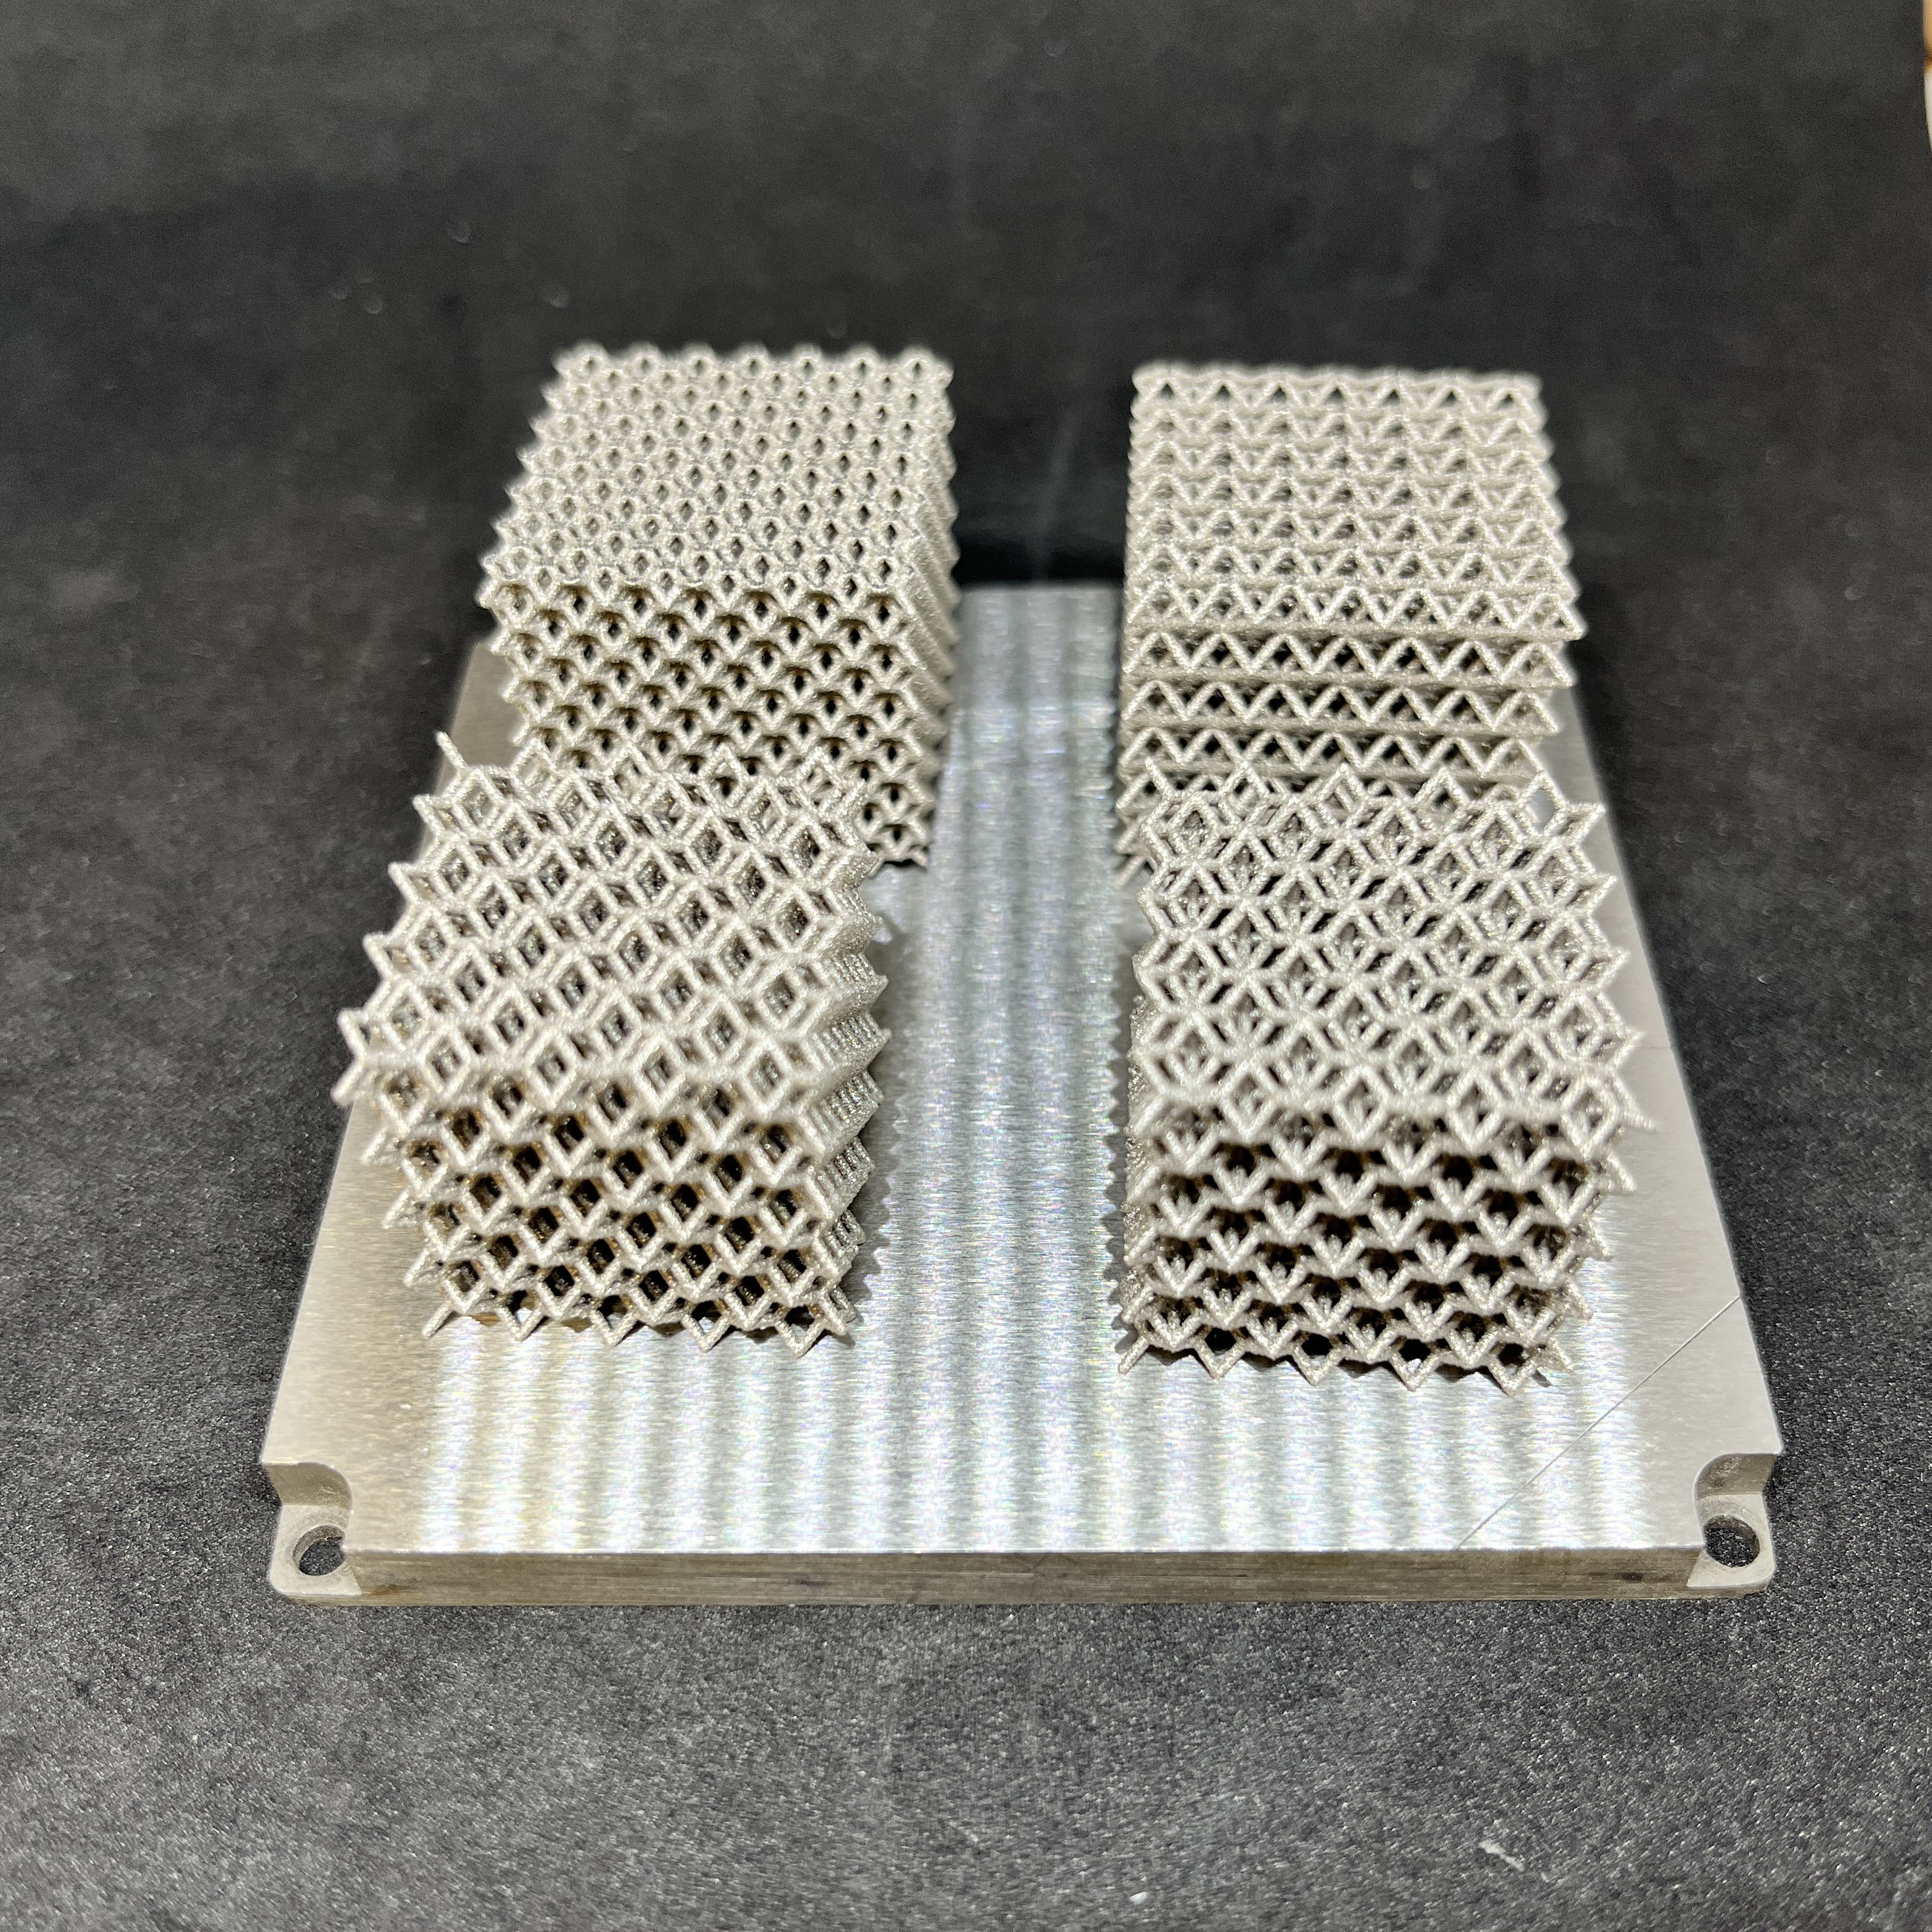 Example of stainless steel 316L lattice structures 